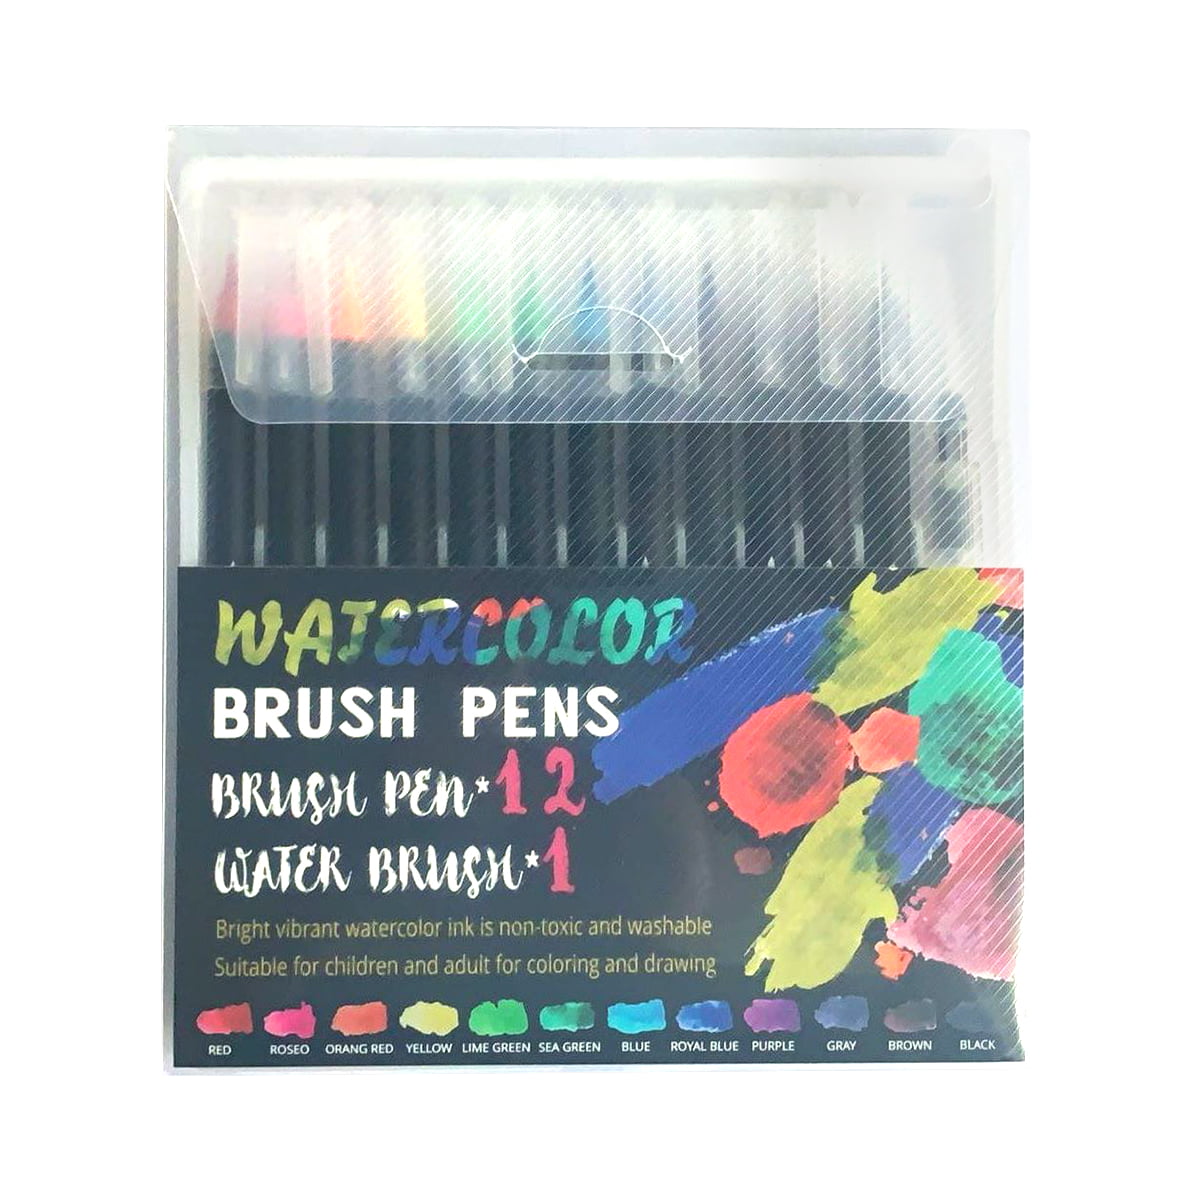 Wartercolor Brush Pens 24 Colors Vibrant Watercolor Markers with Bonus 1 Water Brush Nontoxic Watercolor Pens for Beginners and Artists Paint Marker with Flexible Tips 